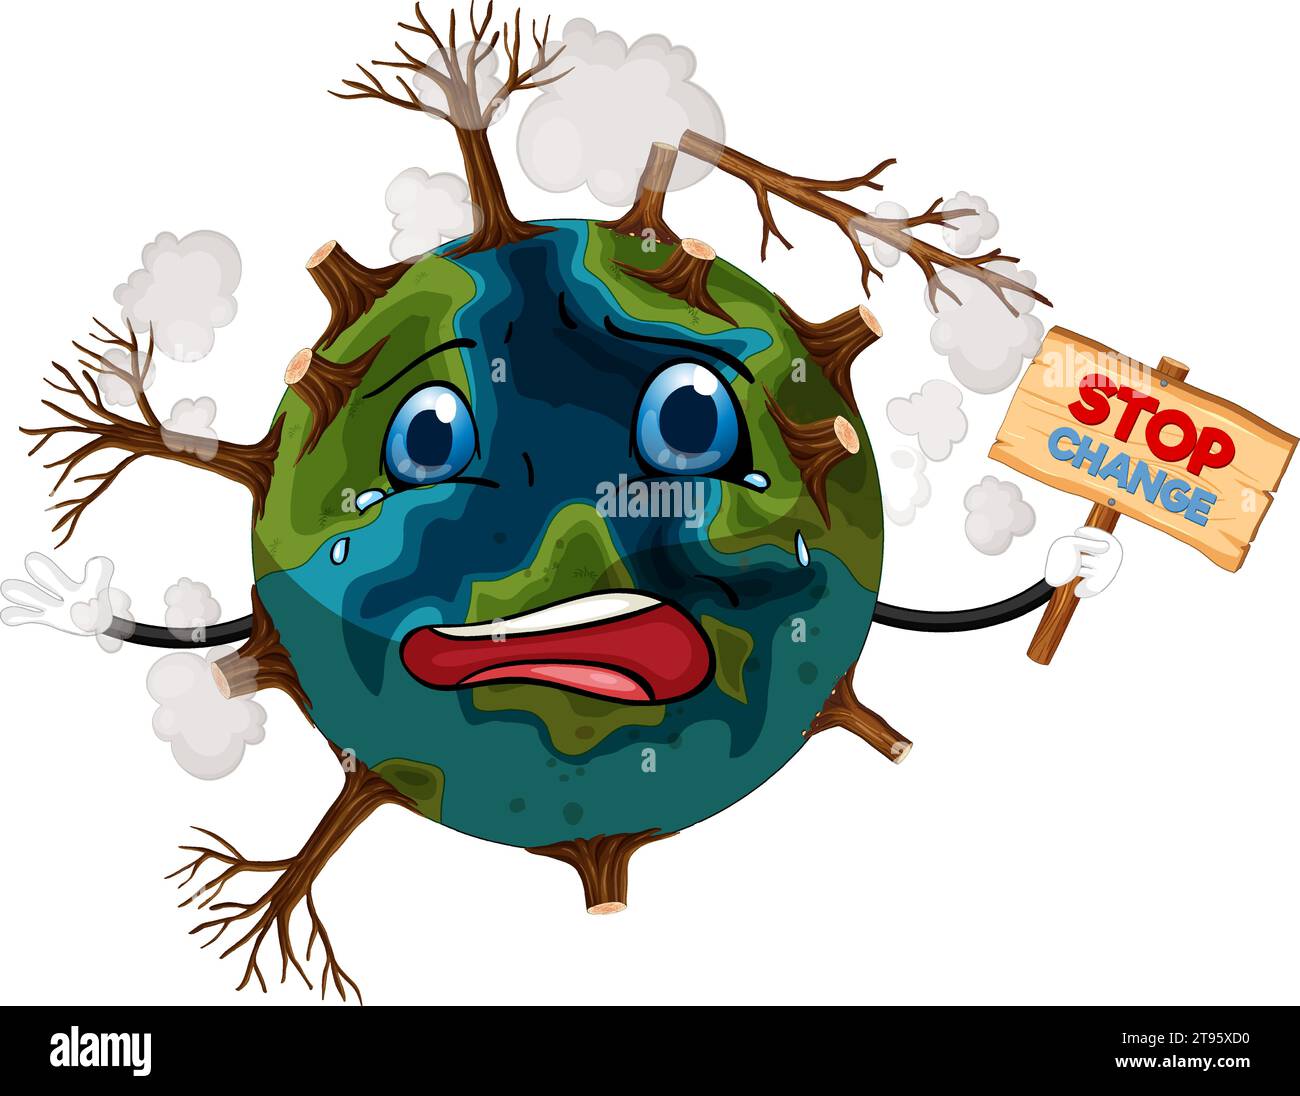 Illustration of a tearful Earth holding a banner to raise awareness about stopping climate change Stock Vector